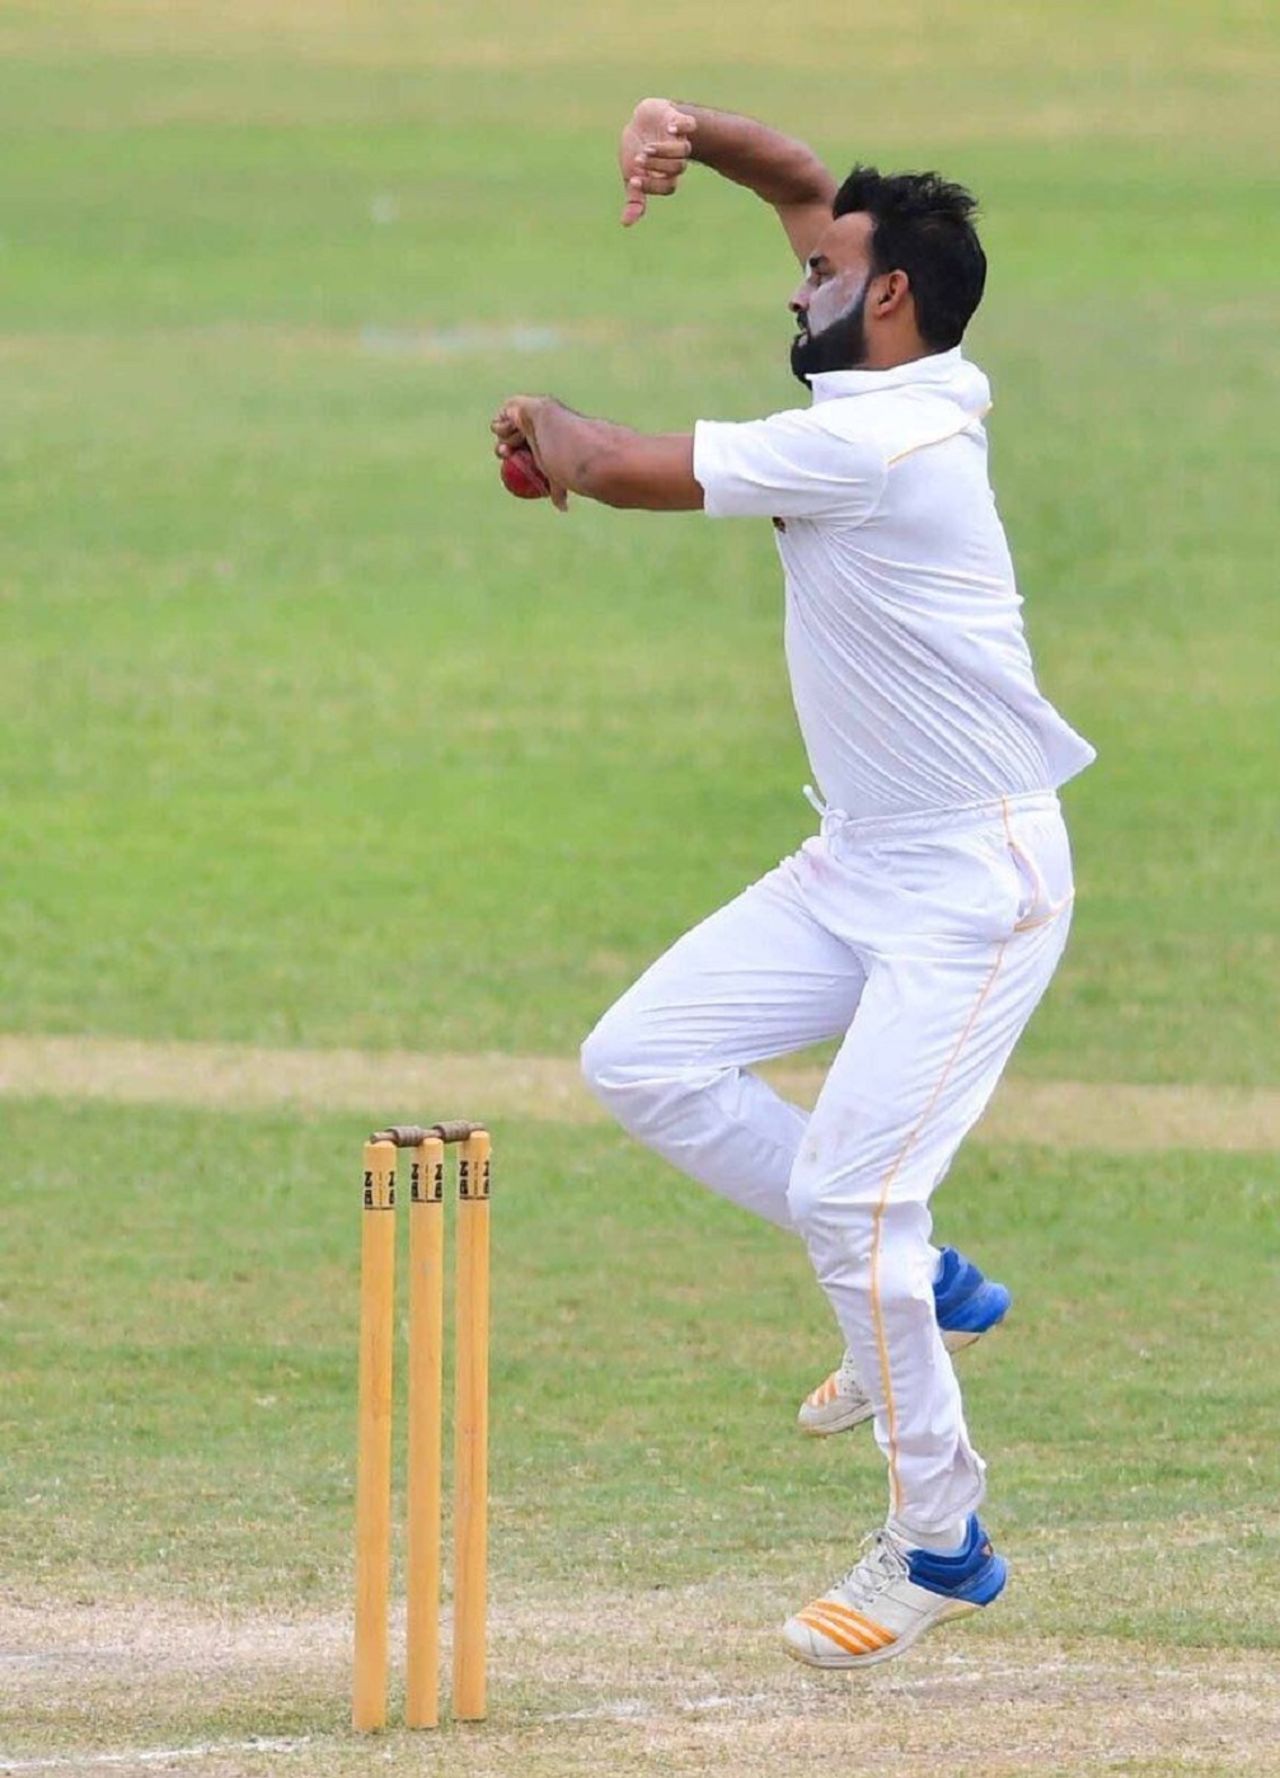 Kashif Bhatti in his delivery stride